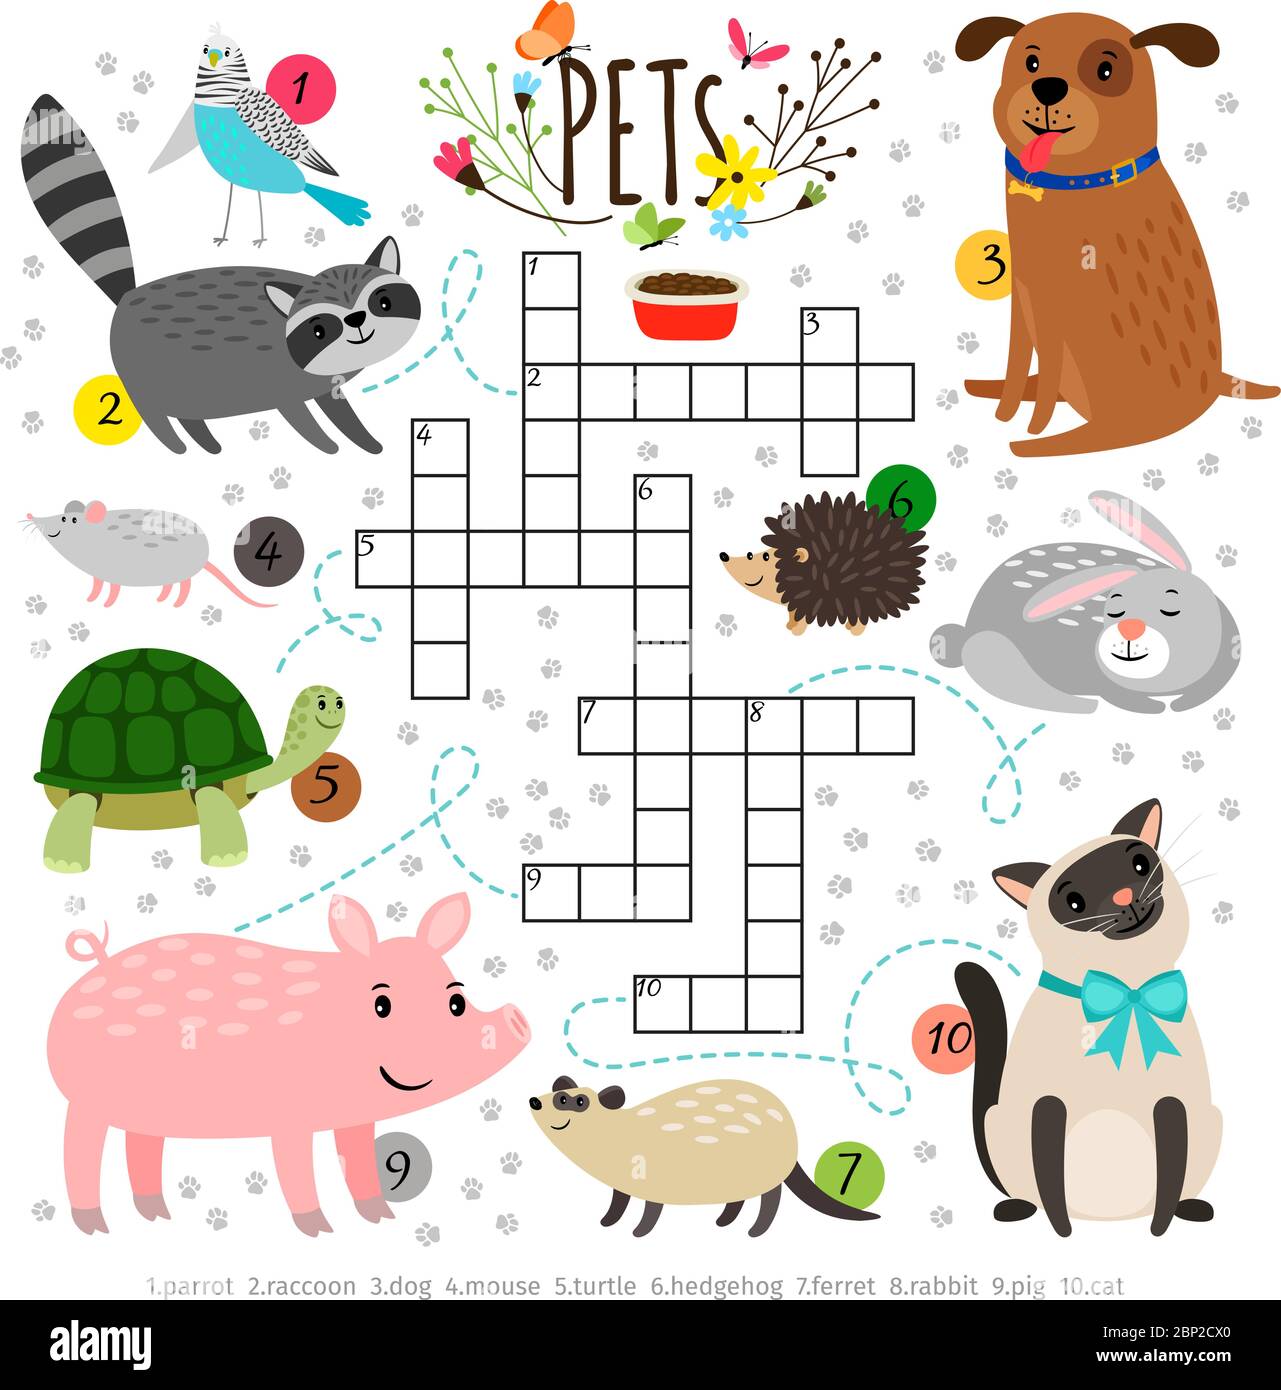 Kids crosswords with pets. Children crossing word search puzzle with